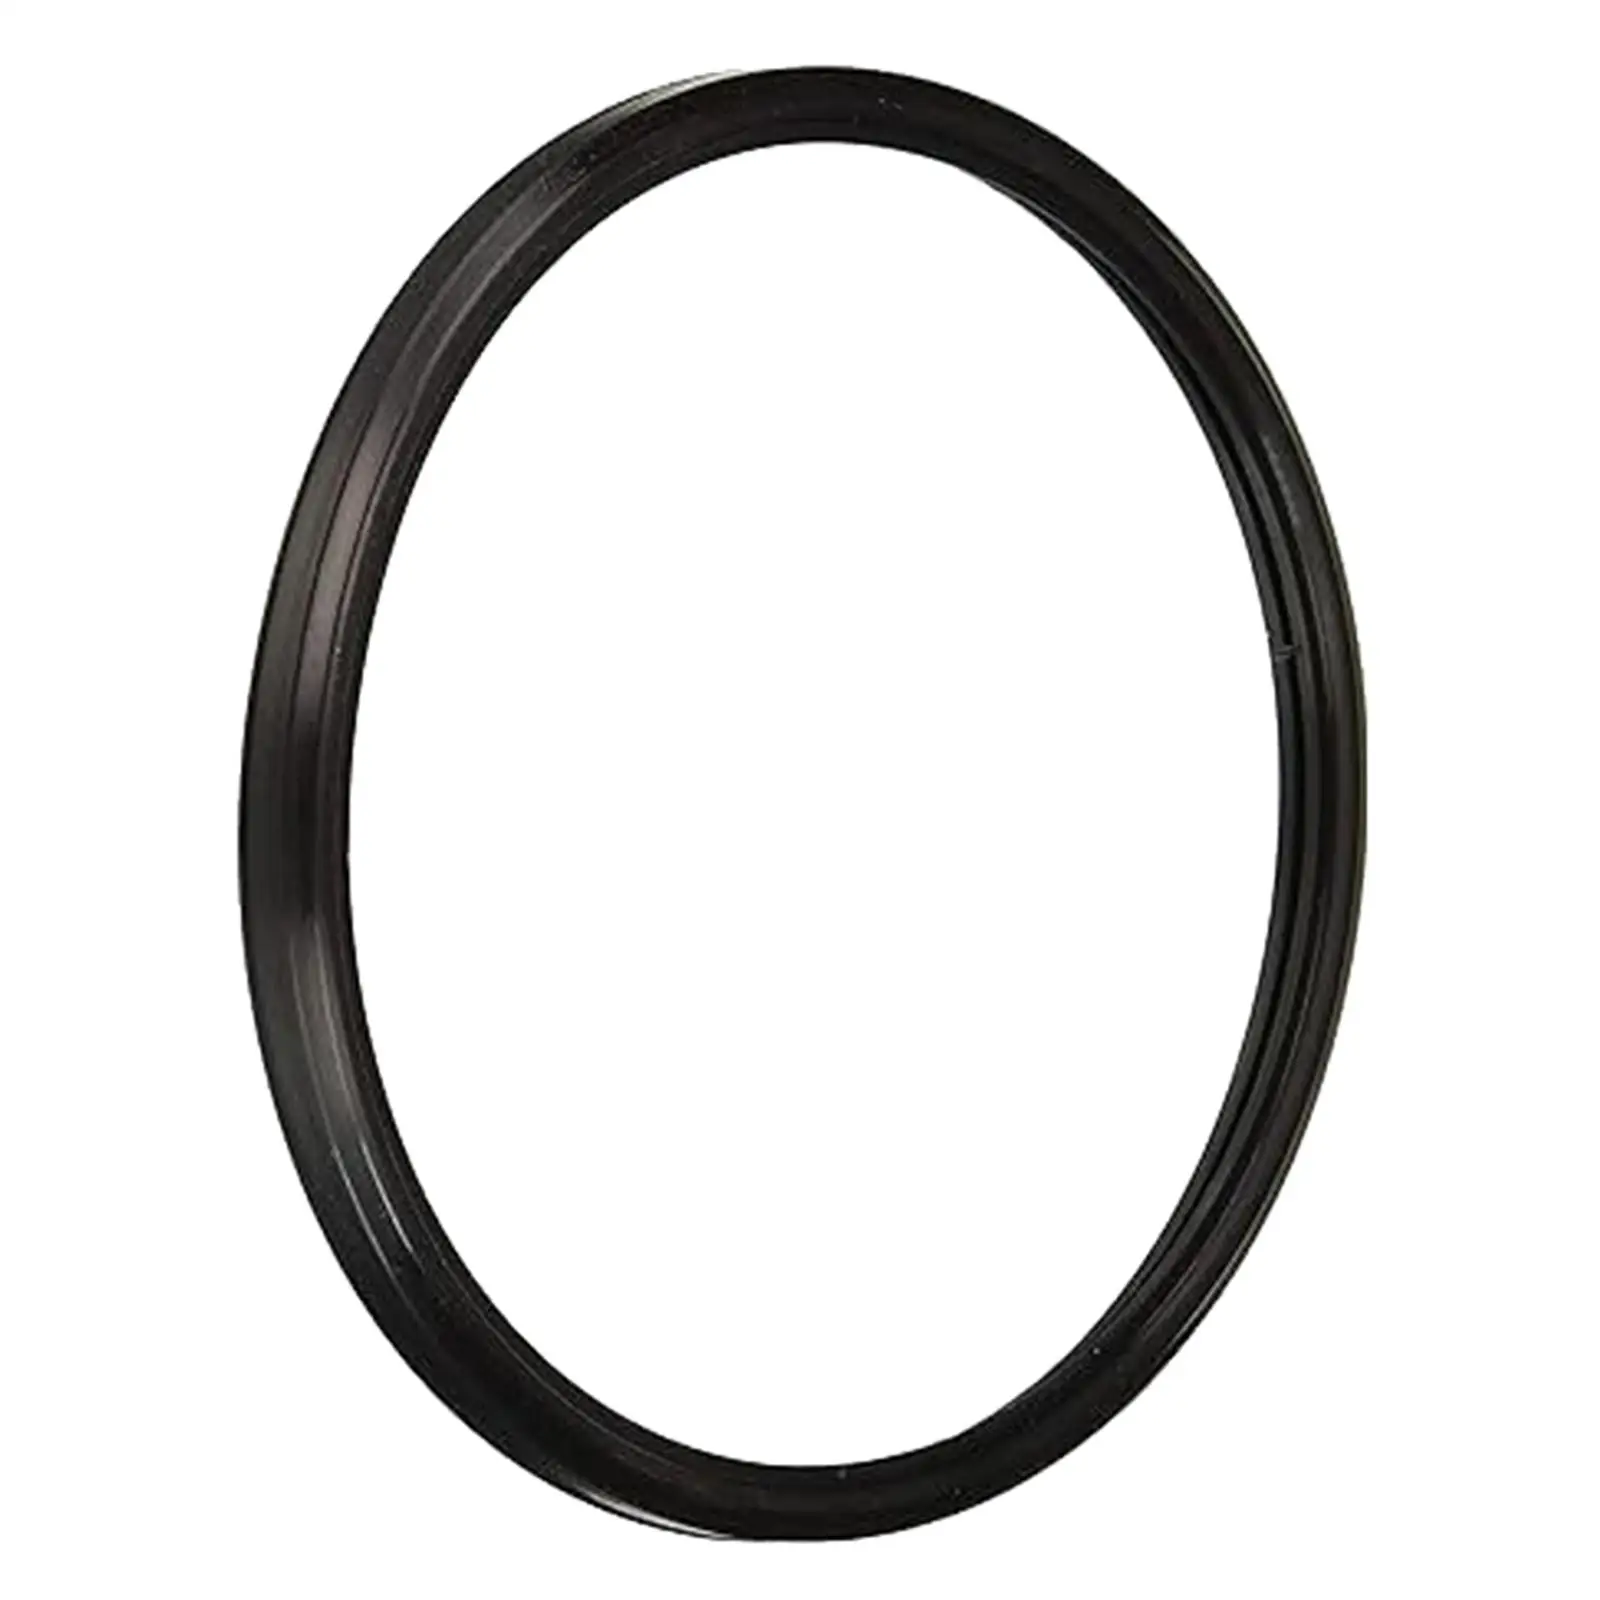 Lens Gasket Rubber Washer Black Underwater Lights Accessory for Spx0540Z2 Spx0580Z2 Replacement Easy Installation Spare Parts